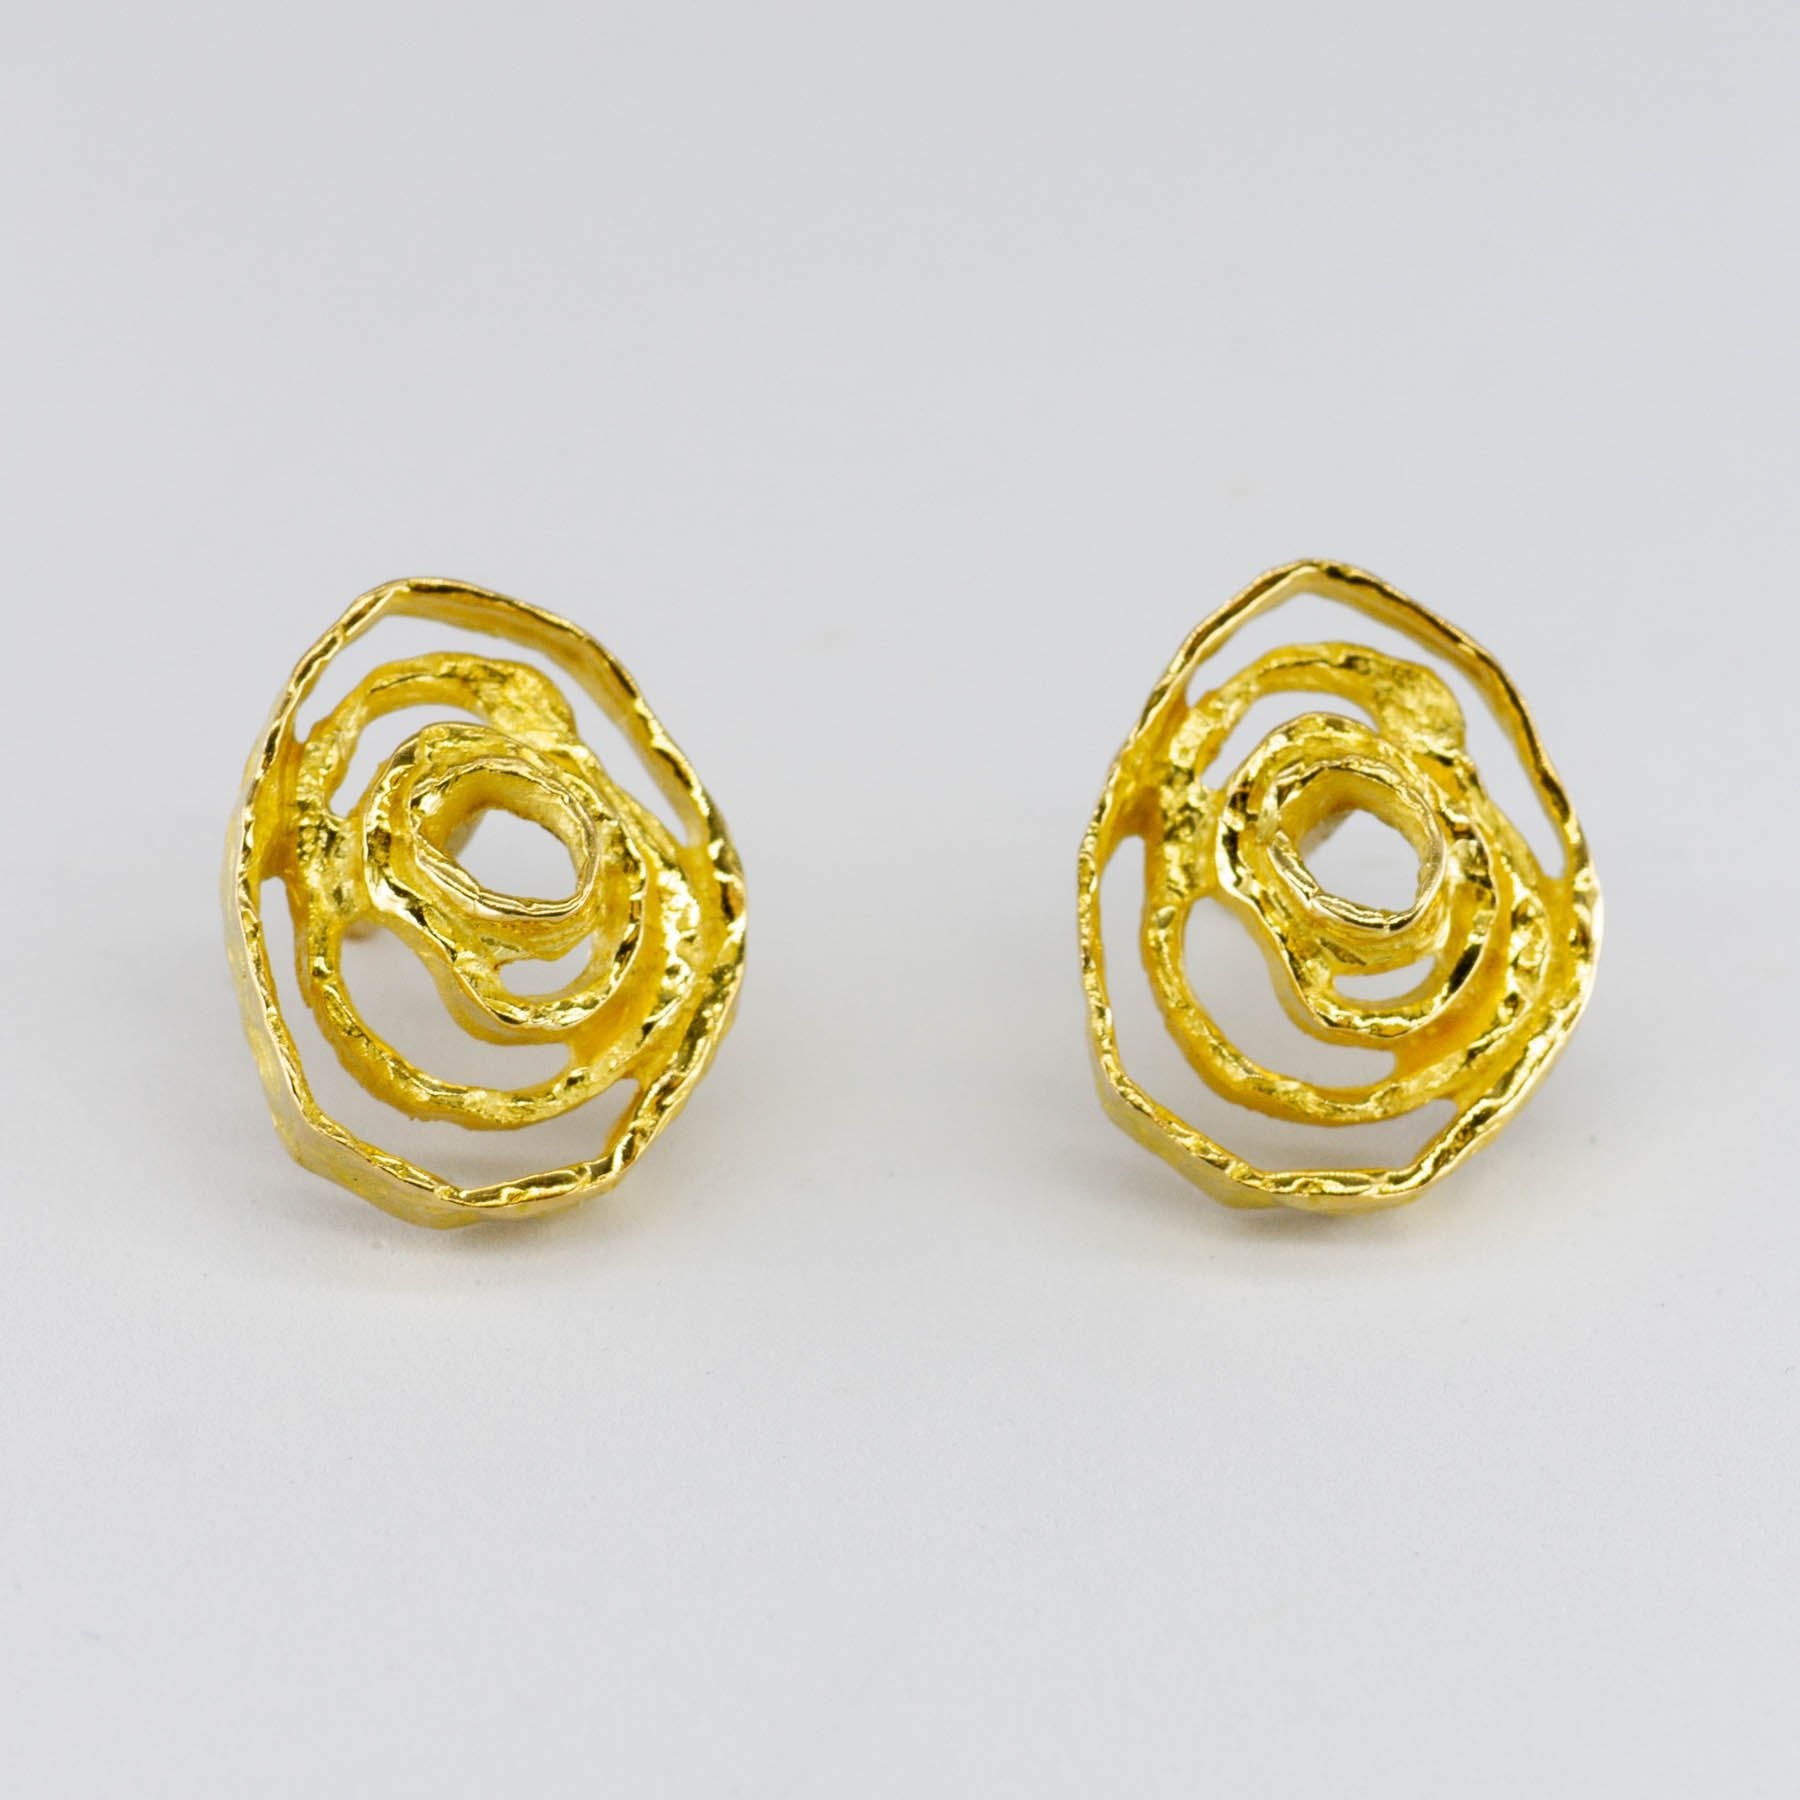 'Cavelti' Concentric 18k Earrings | - 100 Ways